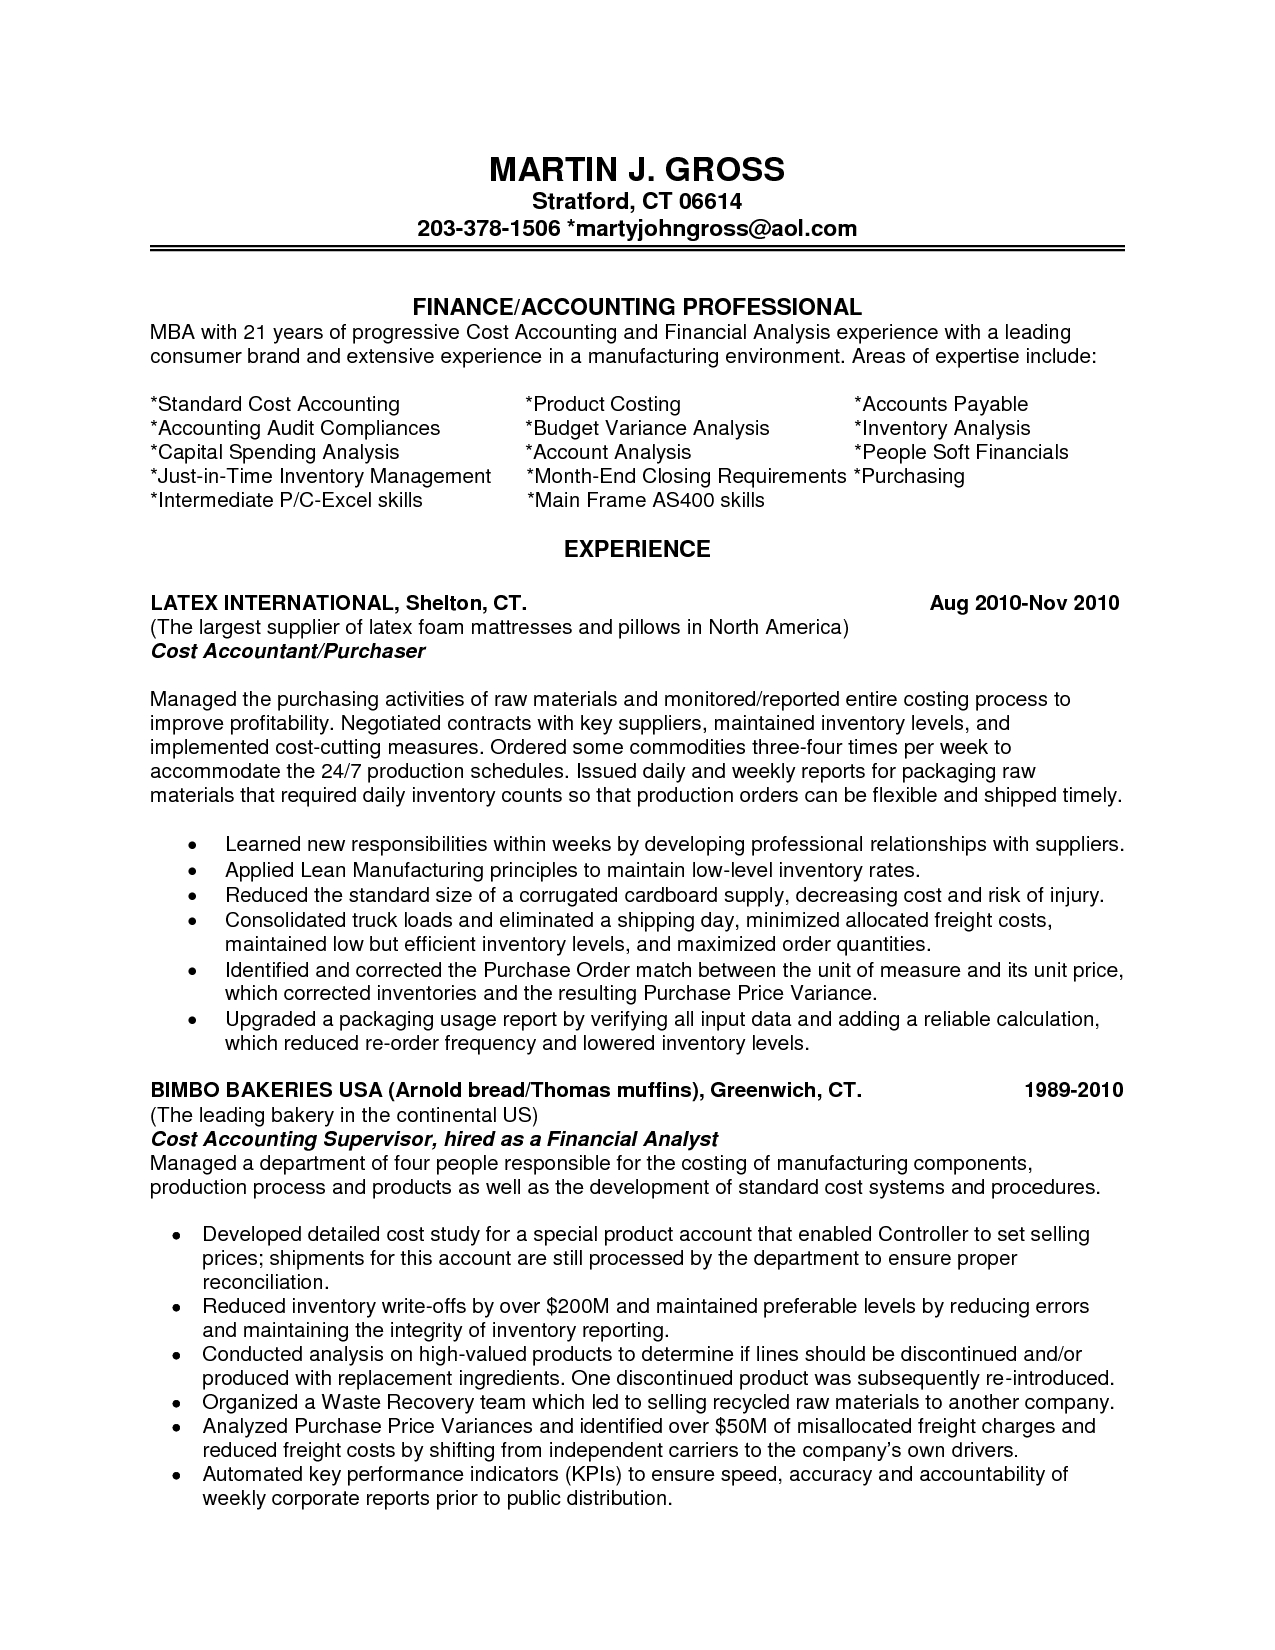 Insurance Contract Negotiation Letter Template - Leasing Consultant Cover Letters Website Inspiration Manufacturing